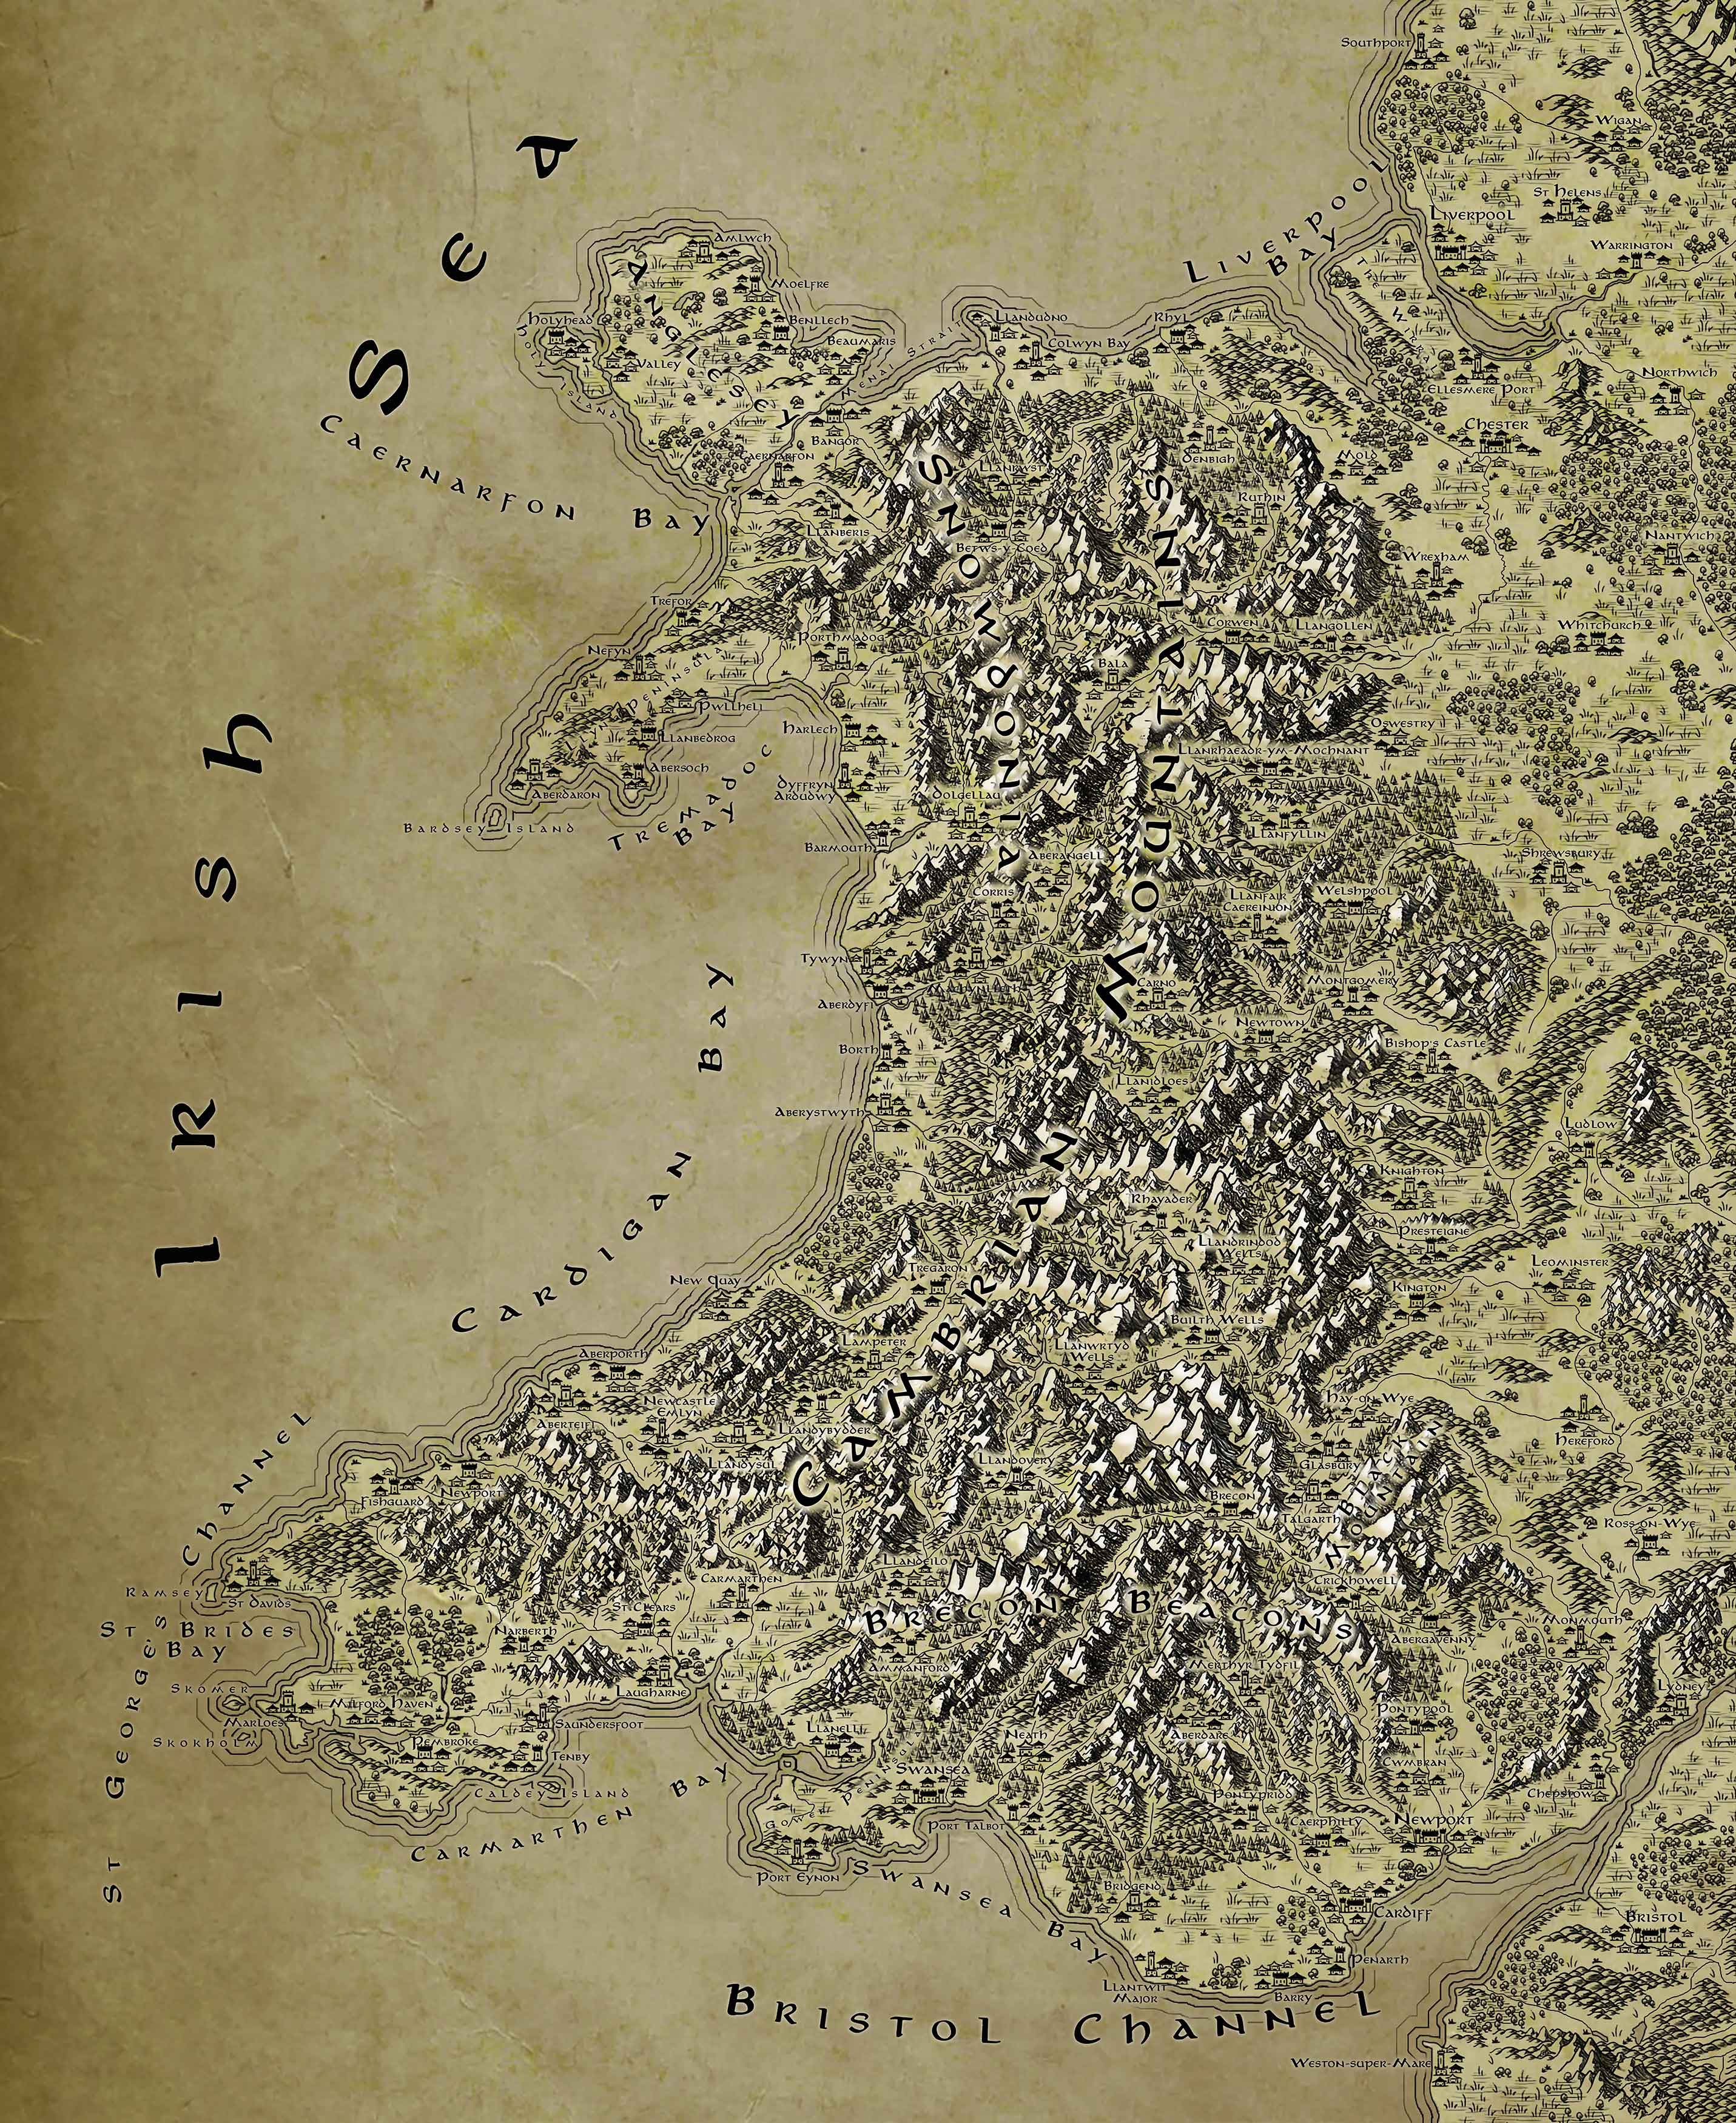 Wales Fantasy Map Lord of the Rings Tolkien Wallpaper Mural